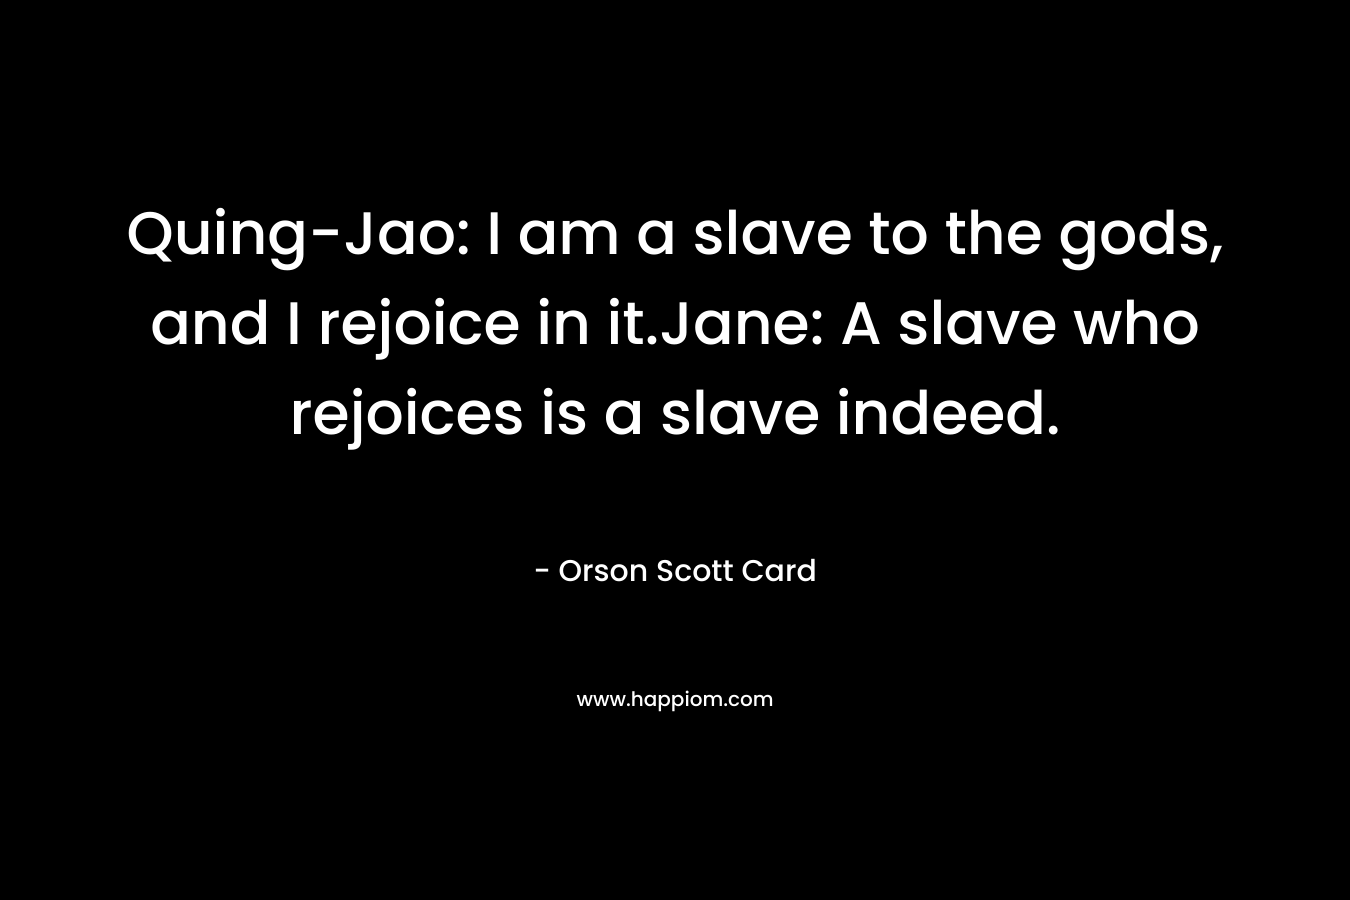 Quing-Jao: I am a slave to the gods, and I rejoice in it.Jane: A slave who rejoices is a slave indeed.